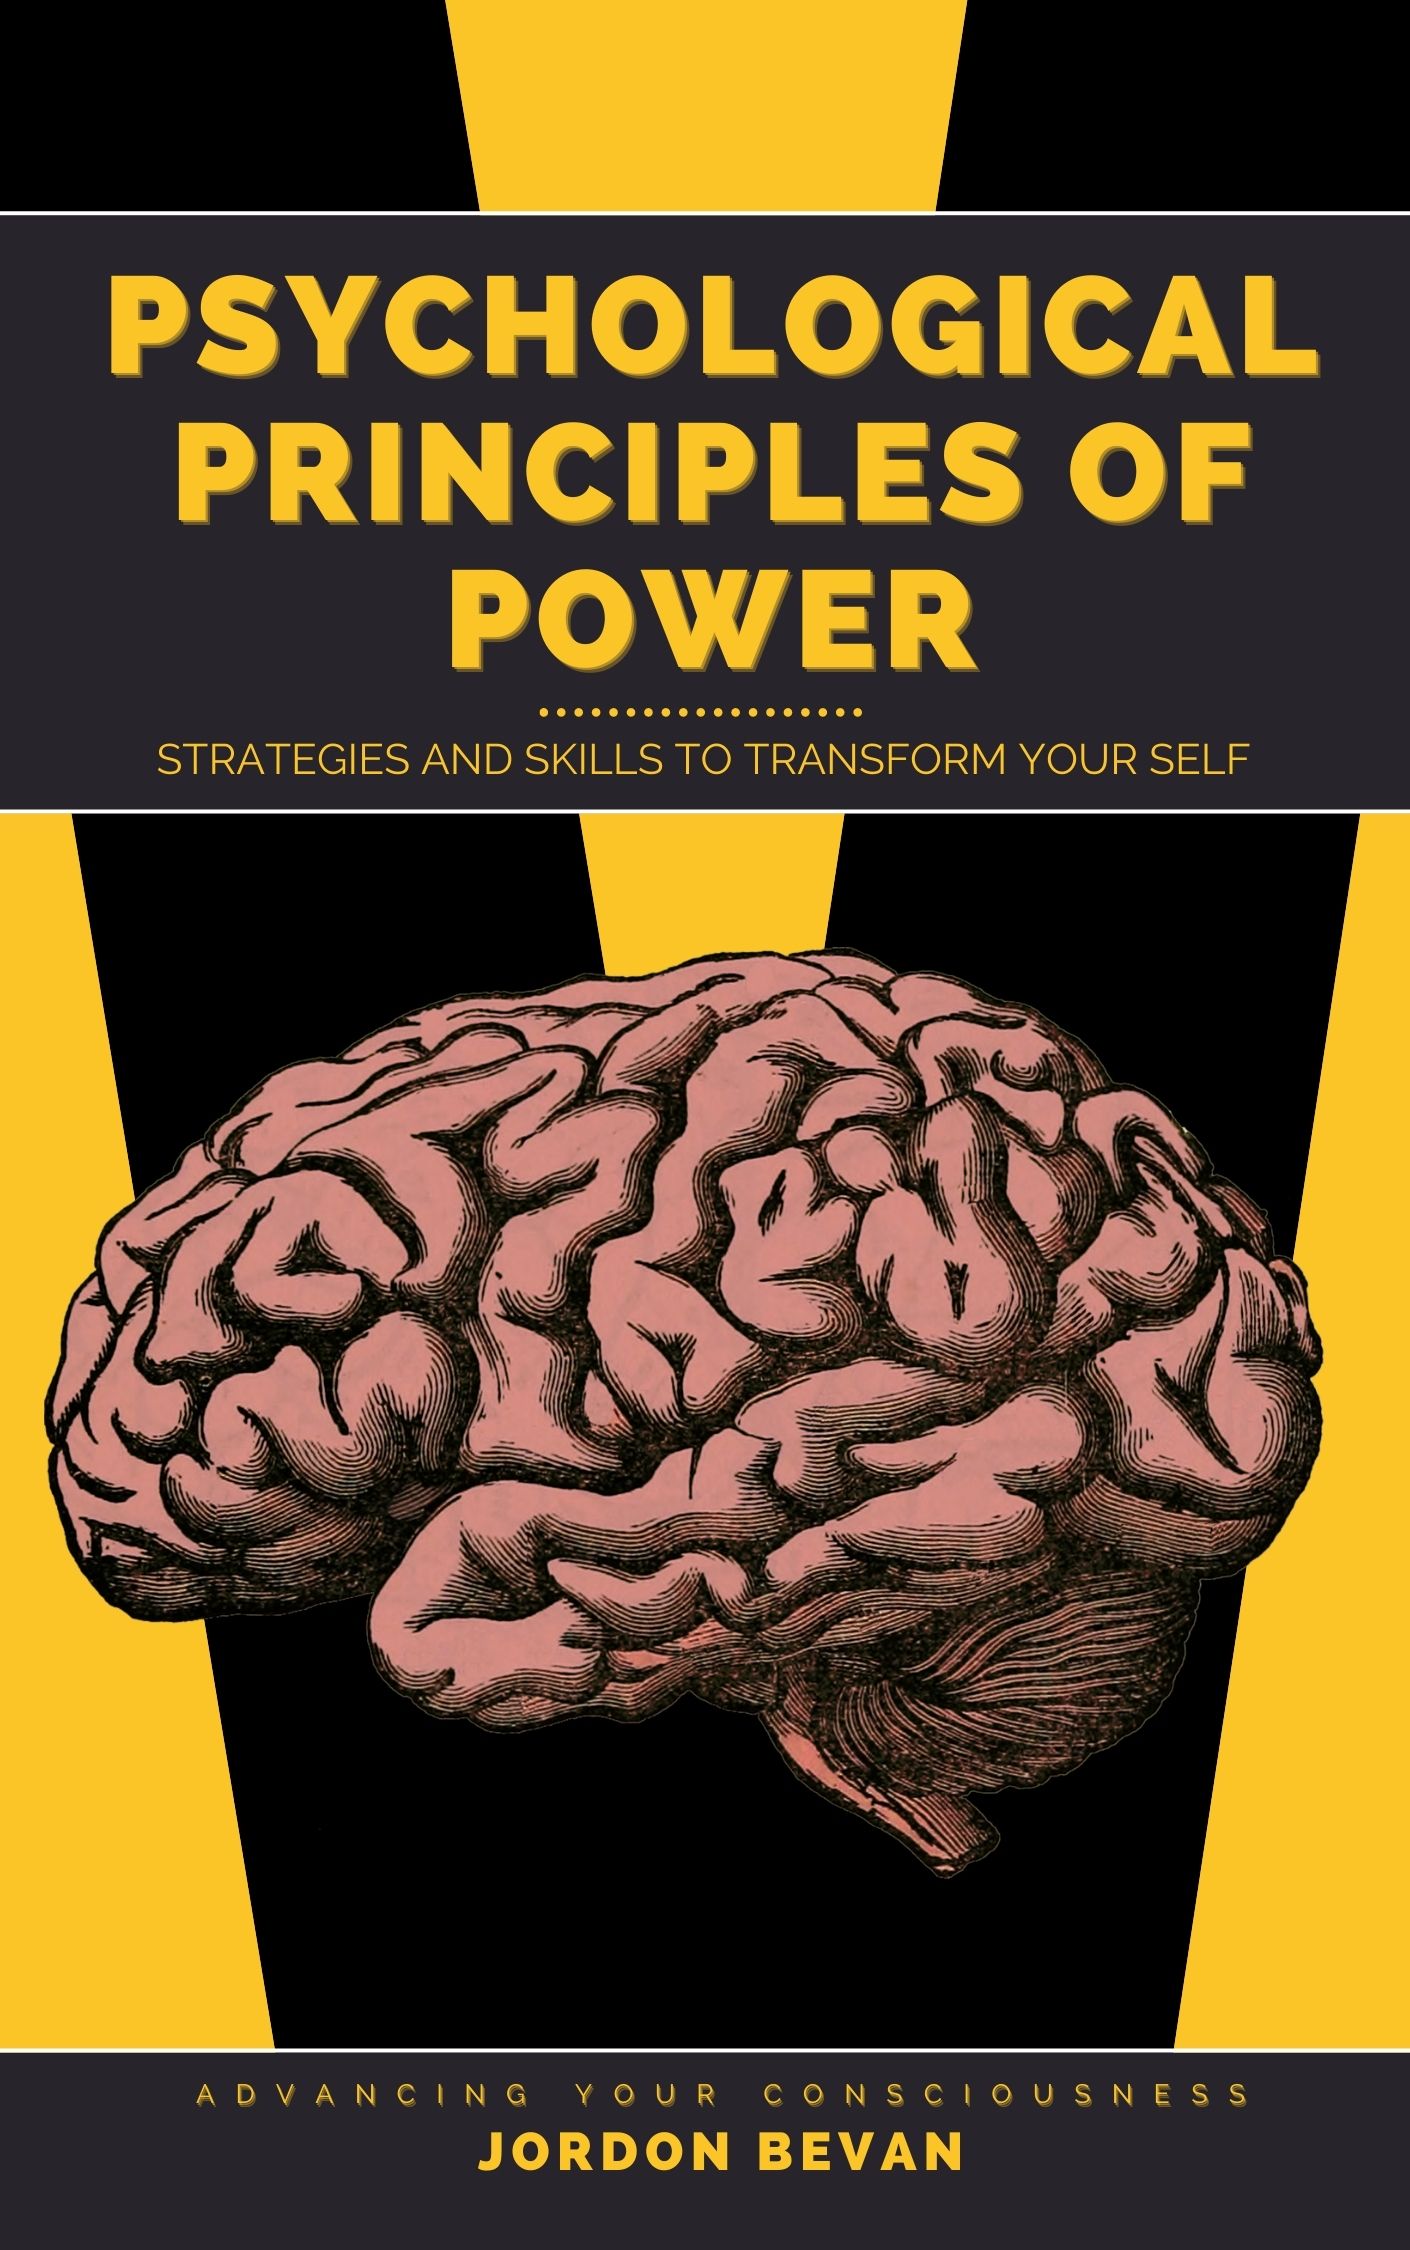 Jordon Bevan Releases New Book, "Psychological Principles of Power: Strategies and Skills to Transform Your Self"